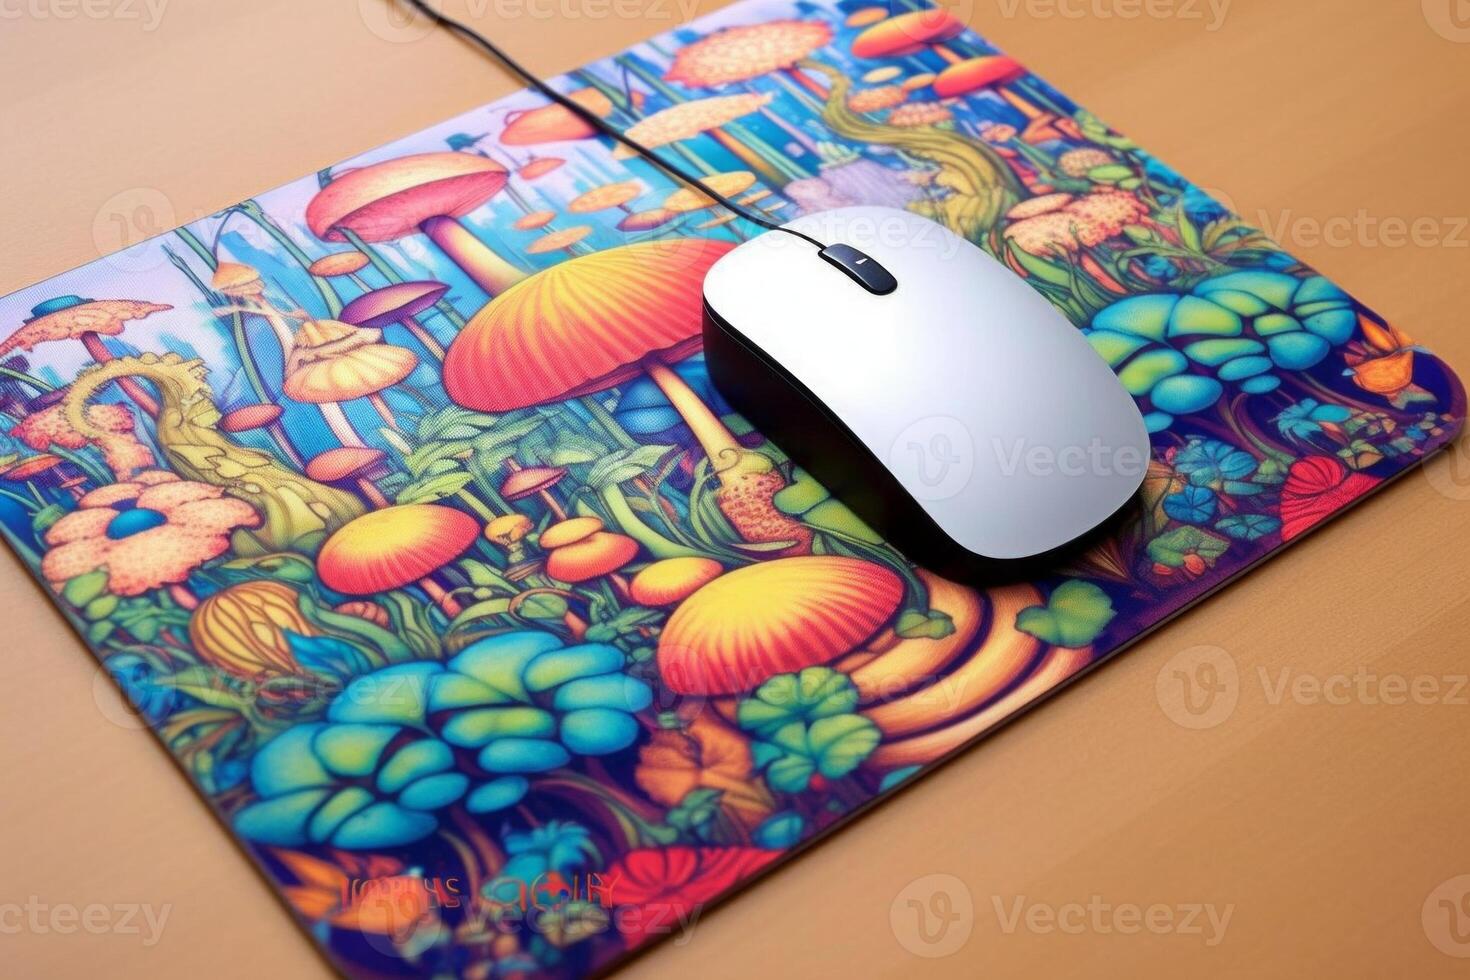 Silver Computer mouse on colorful mouse mat on the table. photo